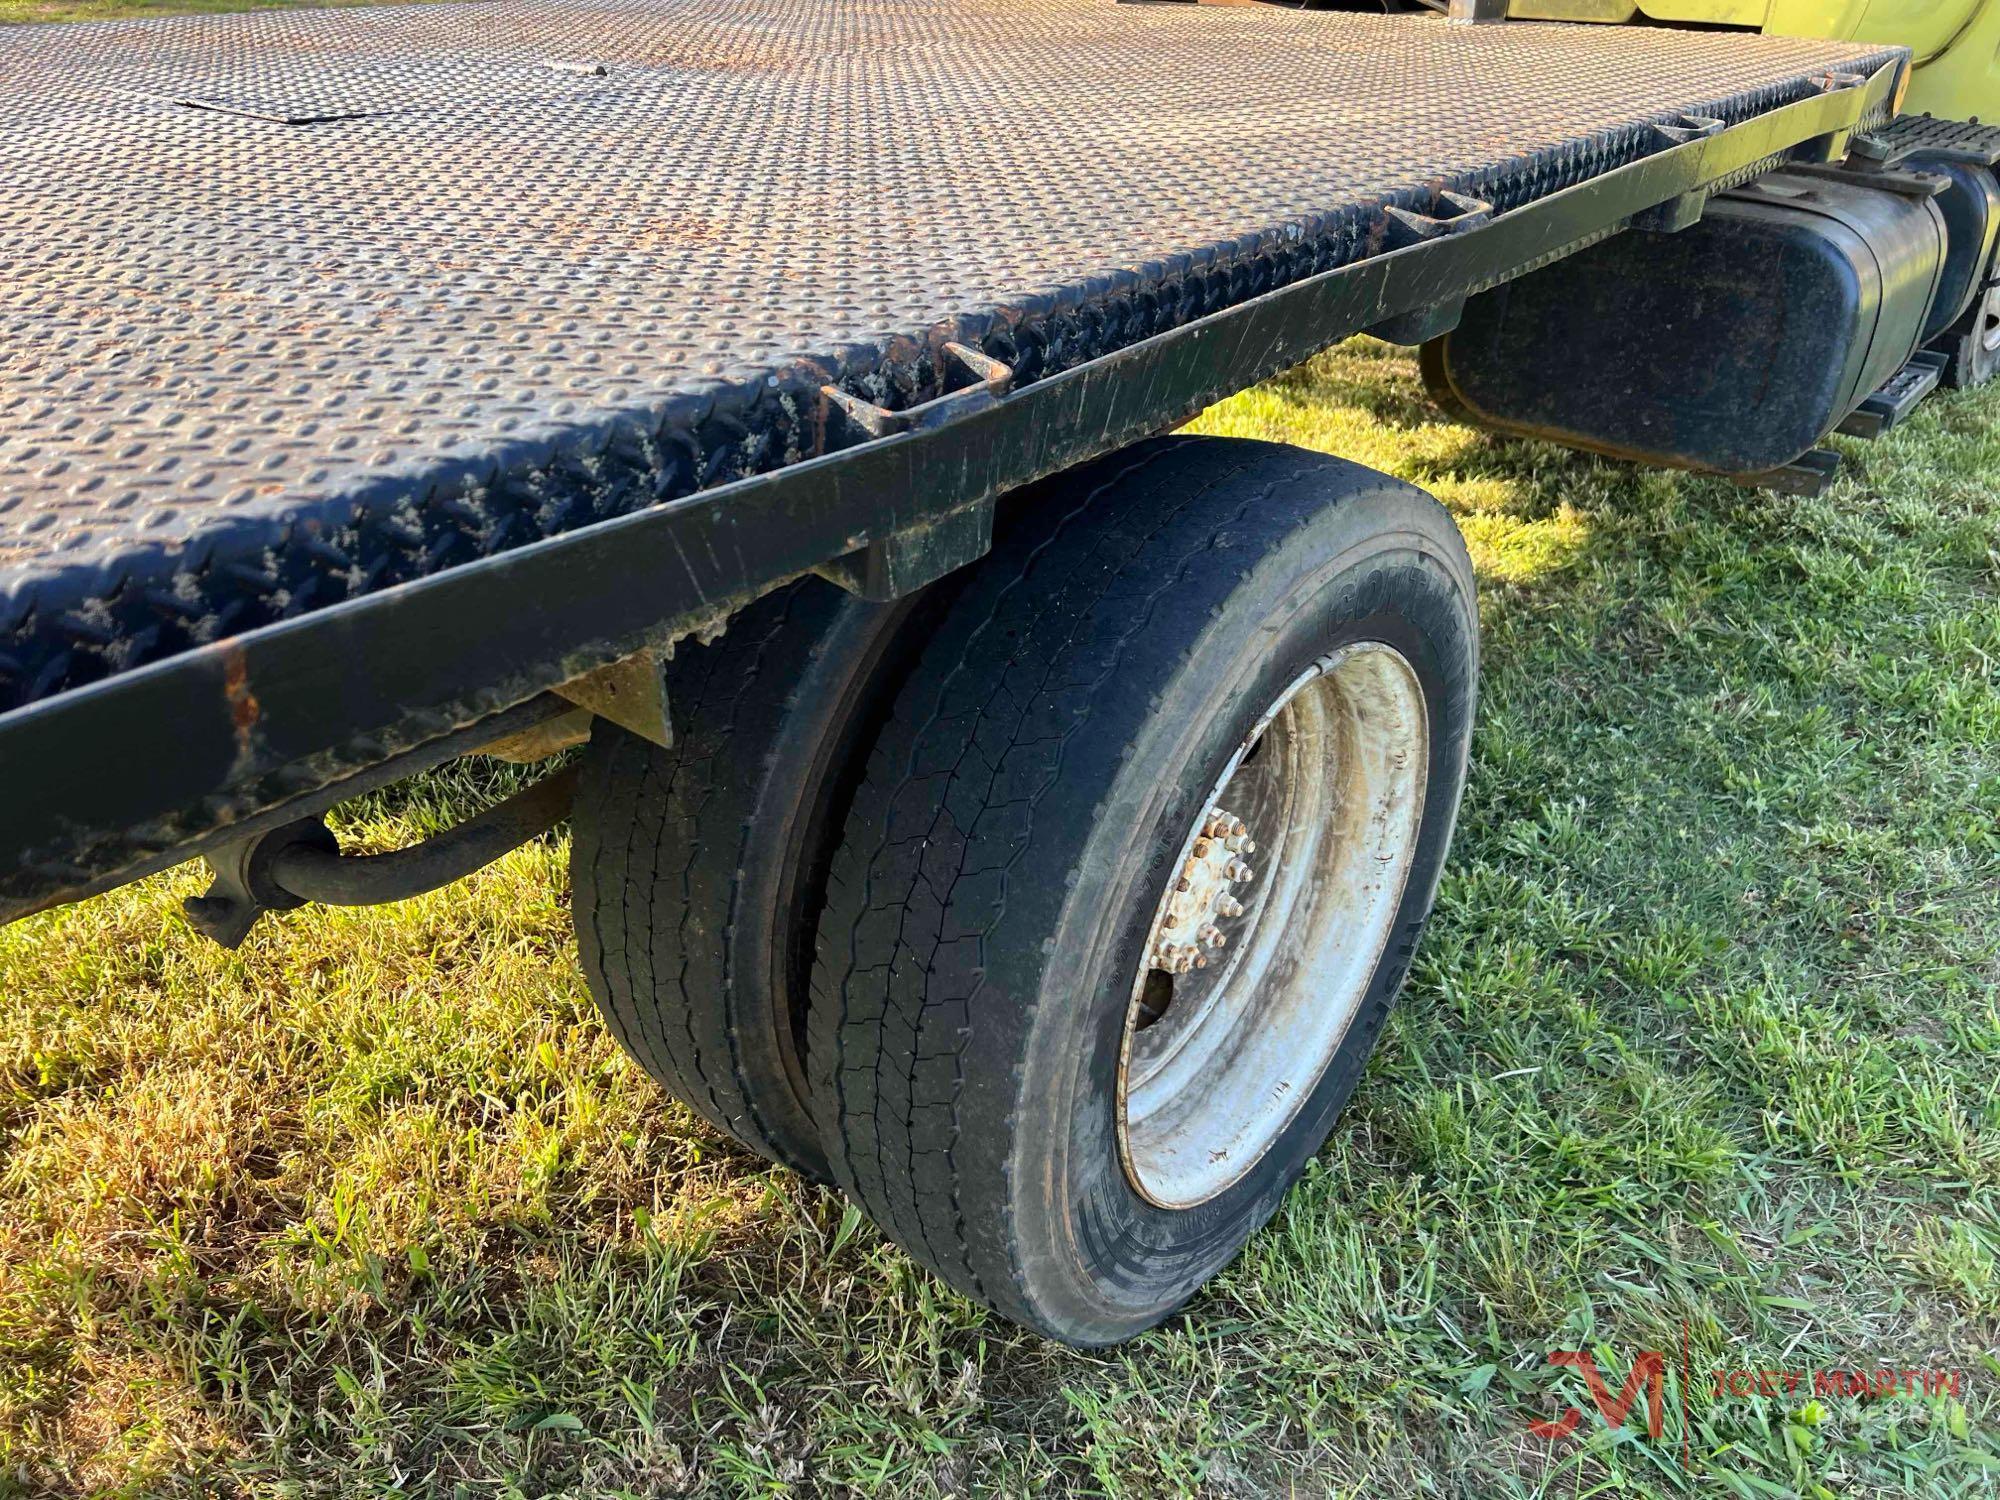 1993 CHEVY TOPKICK LOWPRO FLATBED TRUCK